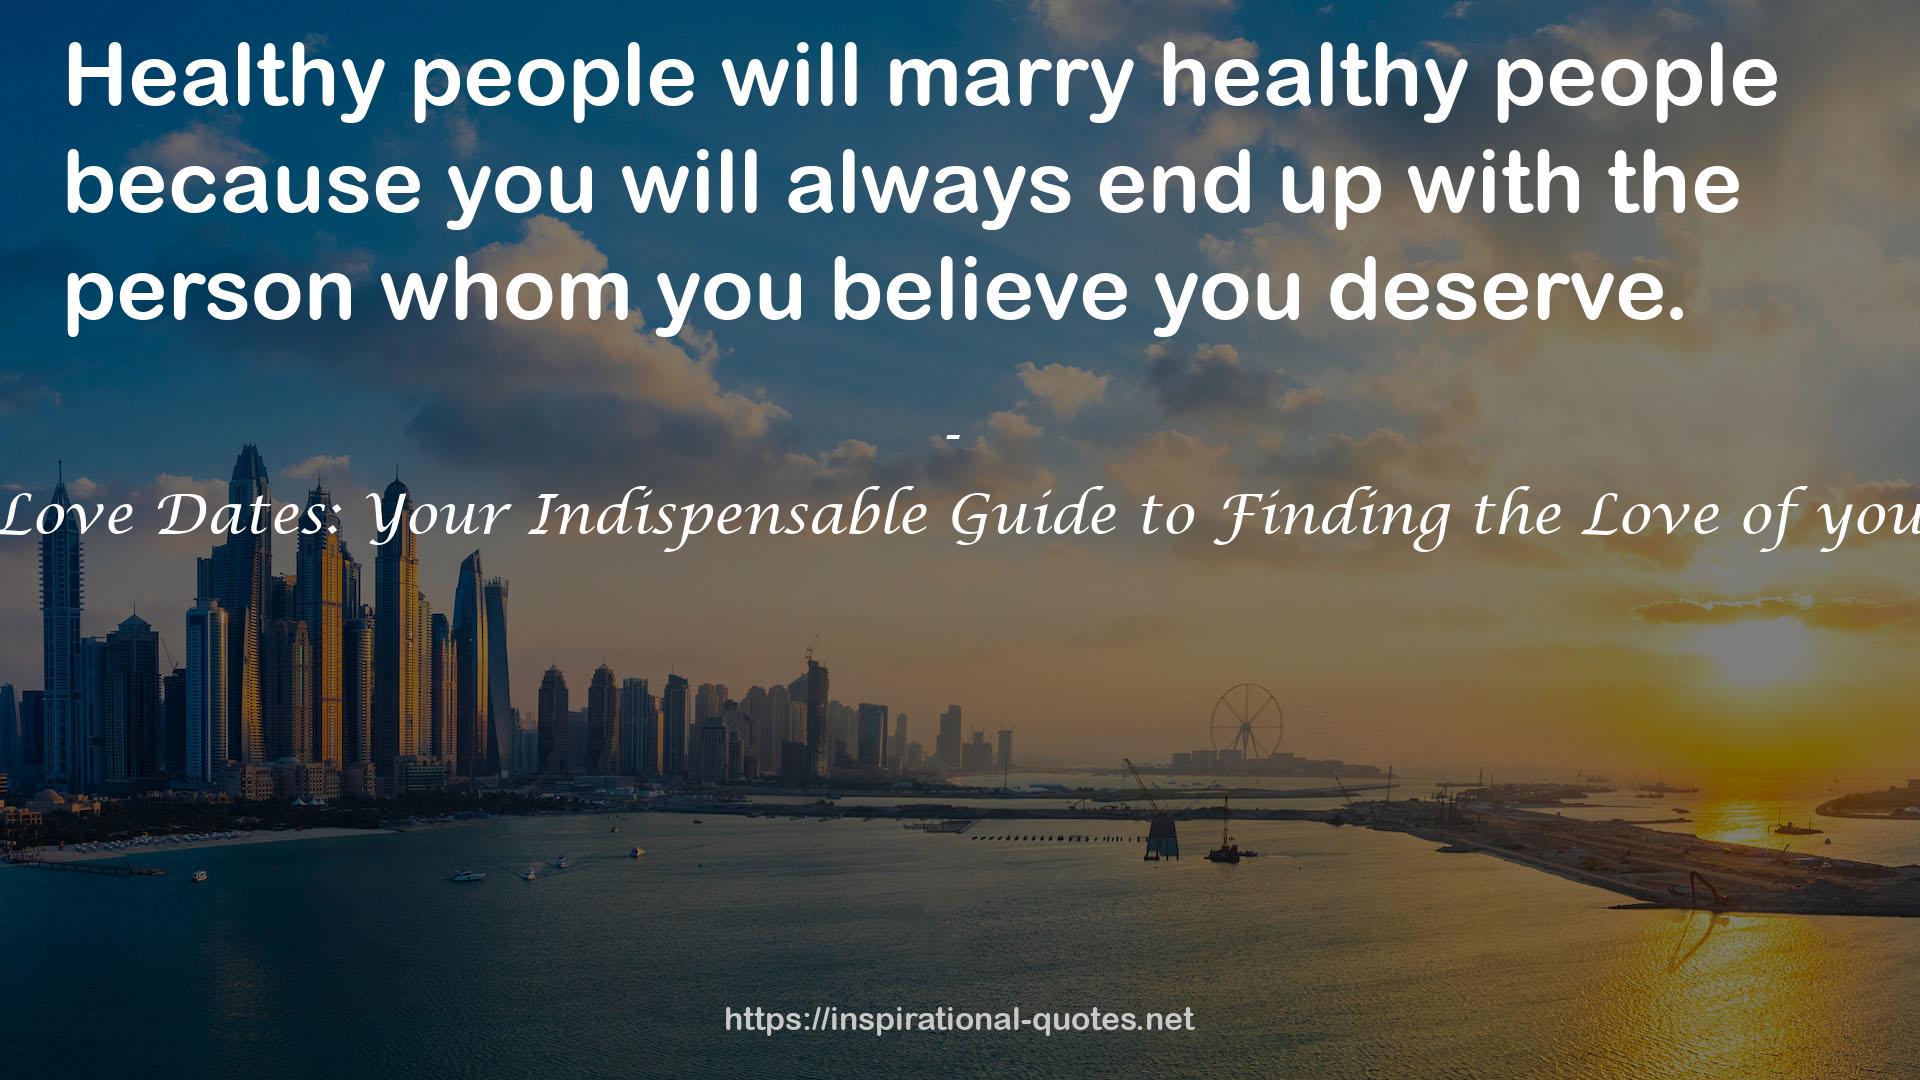 True Love Dates: Your Indispensable Guide to Finding the Love of your Life QUOTES